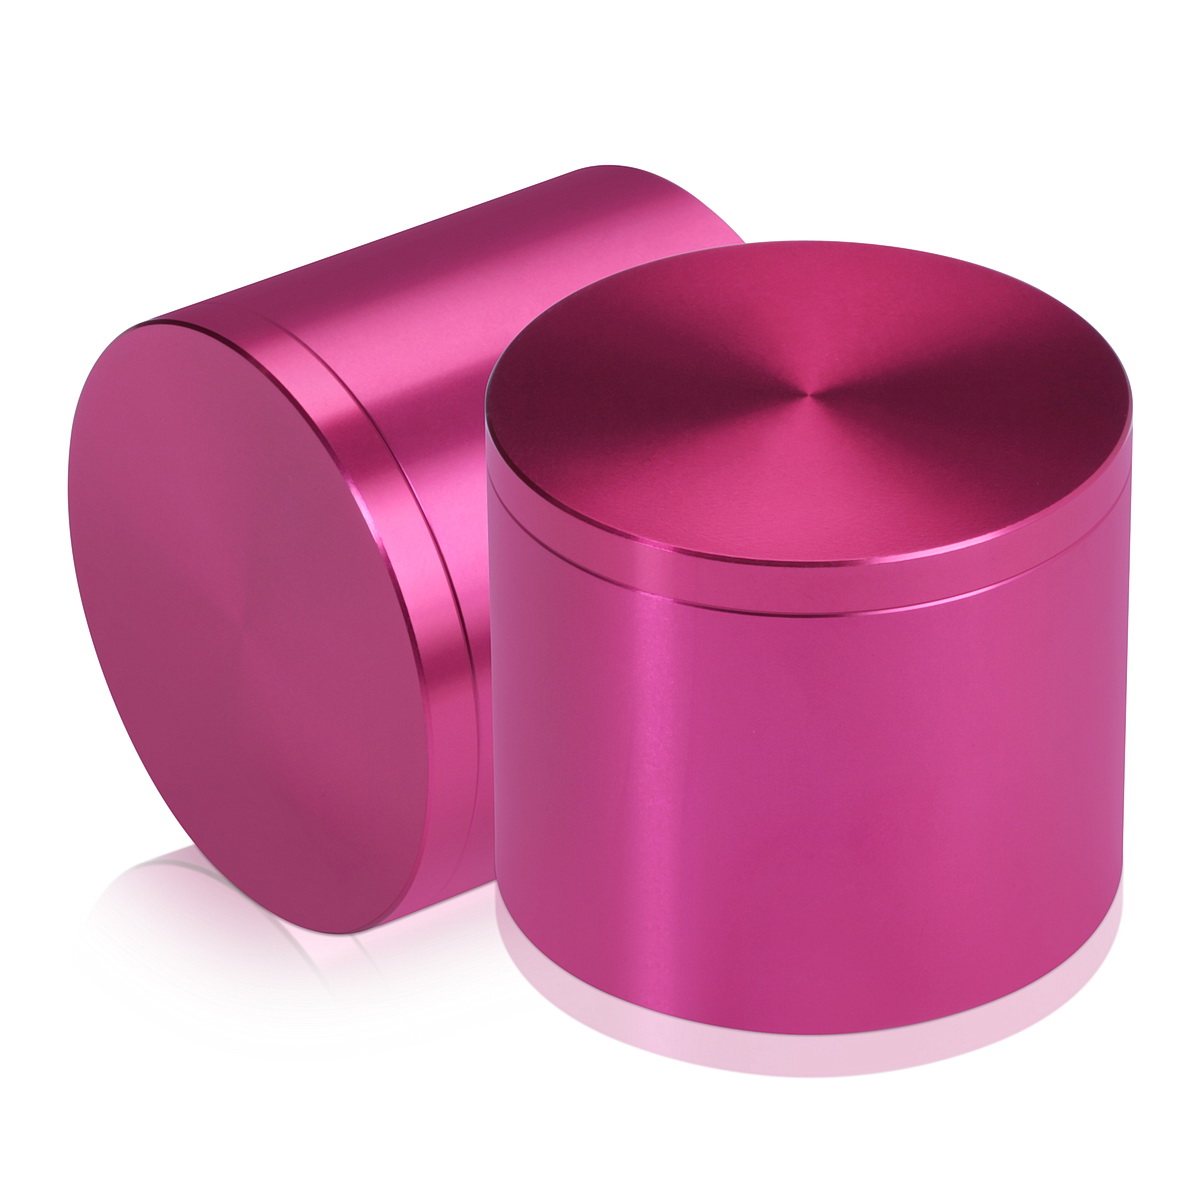 2'' Diameter X 1-1/2'' Barrel Length, Affordable Aluminum Standoffs, Rosy Pink Anodized Finish Easy Fasten Standoff (For Inside / Outside use) [Required Material Hole Size: 7/16'']